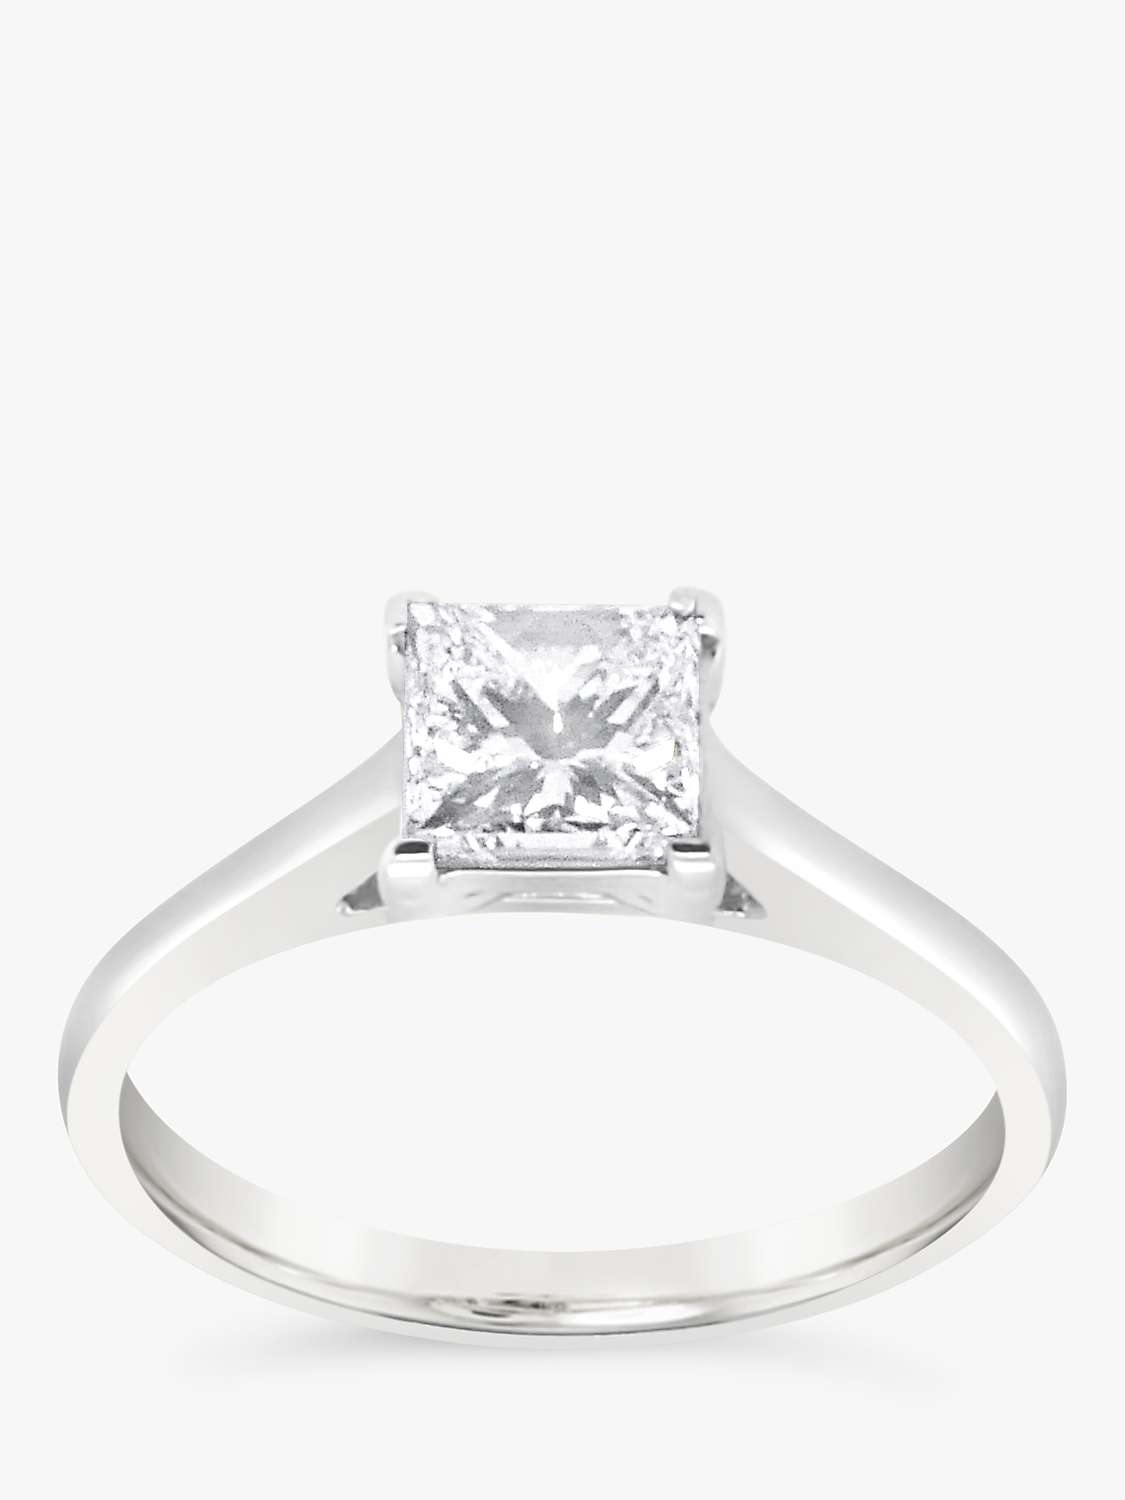 Buy Milton & Humble Jewellery 18ct White Gold Second Hand Princess Cut Diamond Ring Online at johnlewis.com